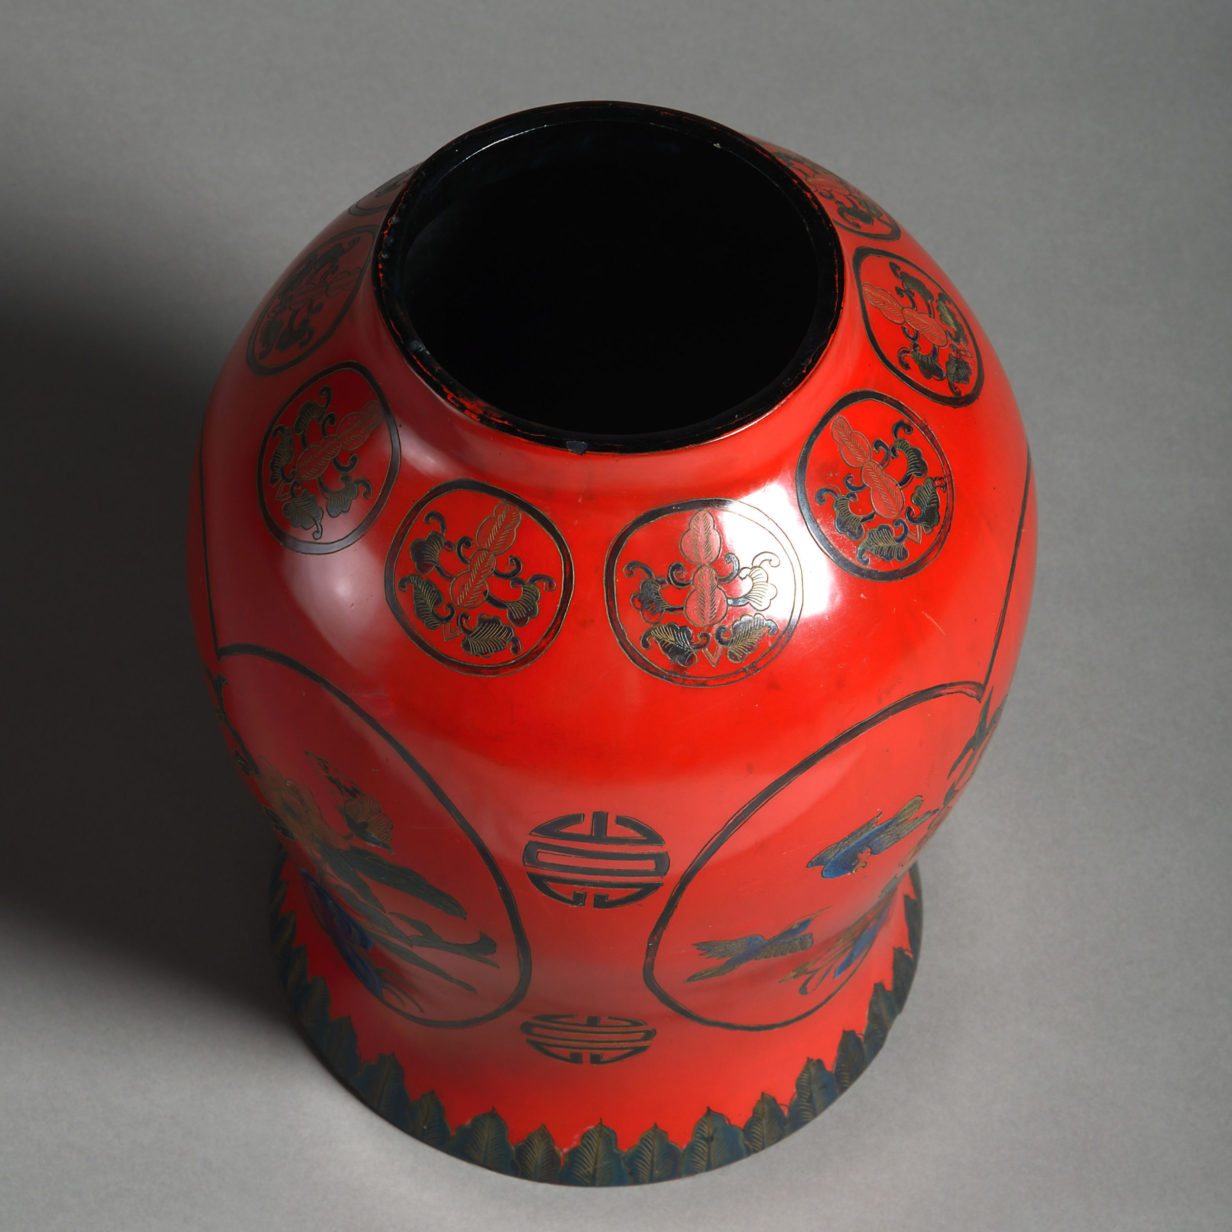 Early 20th century red lacquer vase